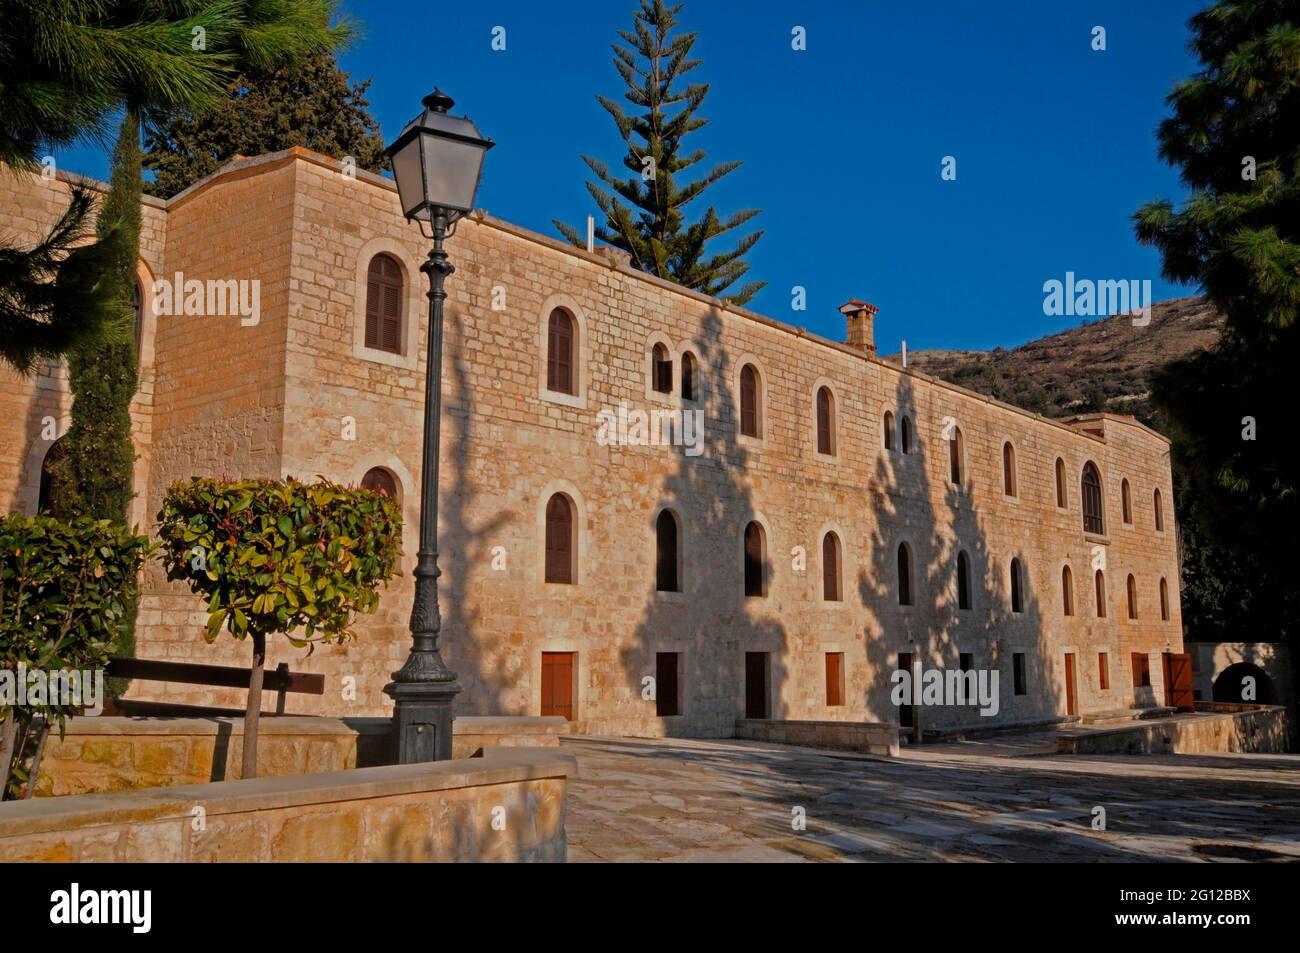 Buildings and terrace at the Monastery of Agios Neofytos in Pafos Cyprus Stock Photo